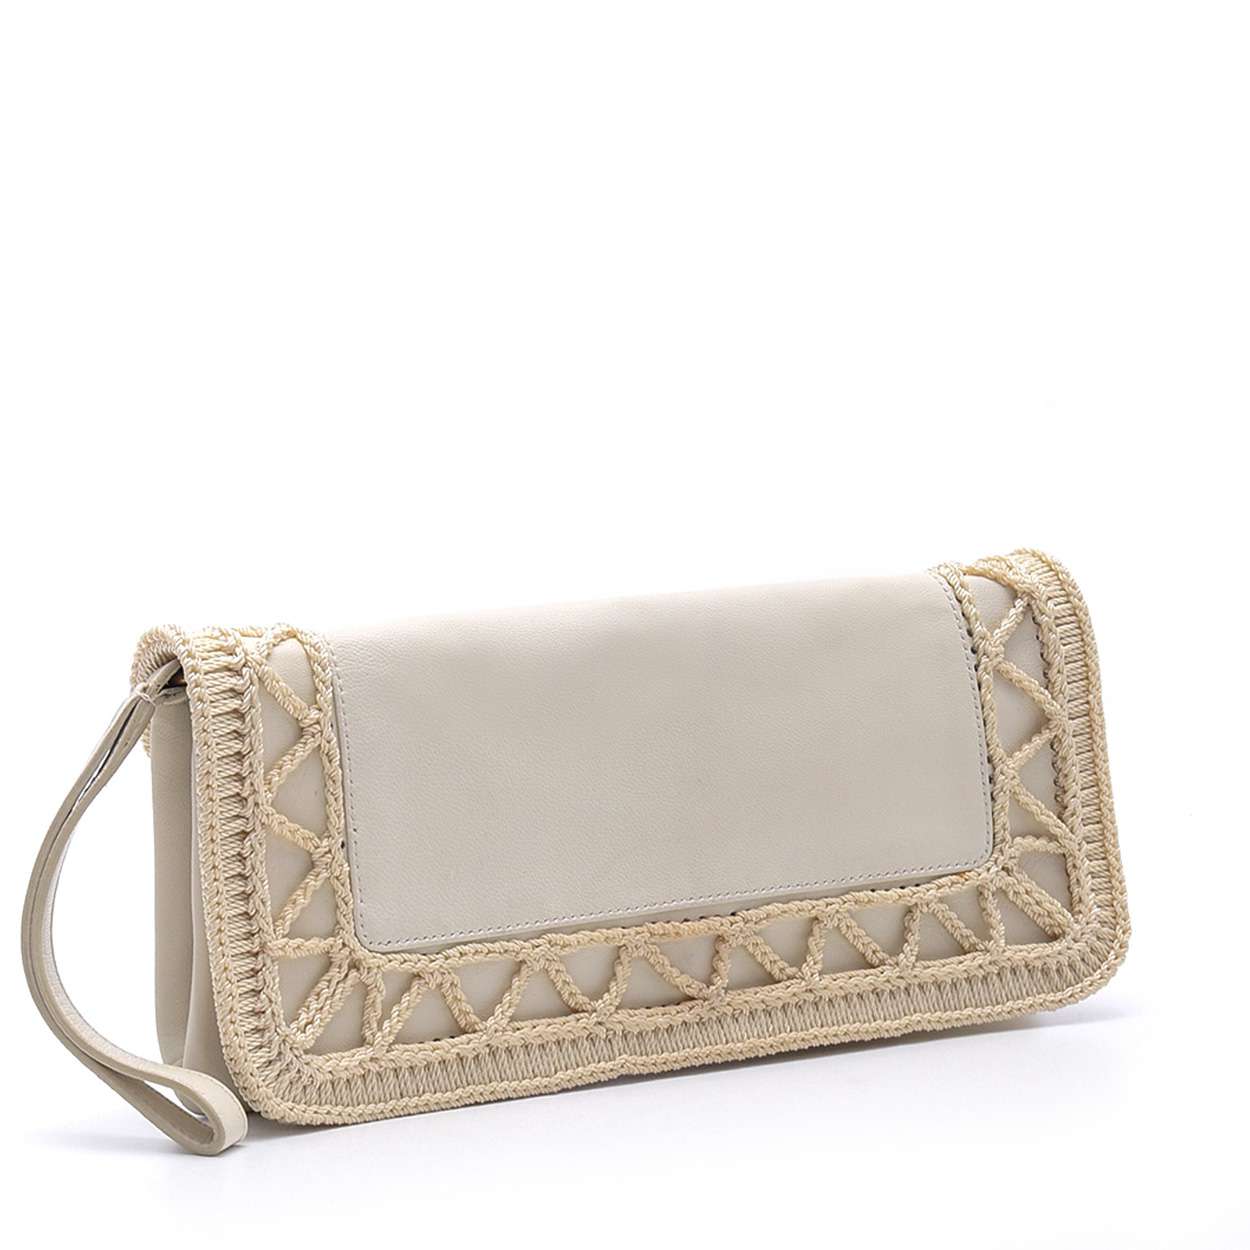 Yves Saint Laurent - White Leather Clutch 